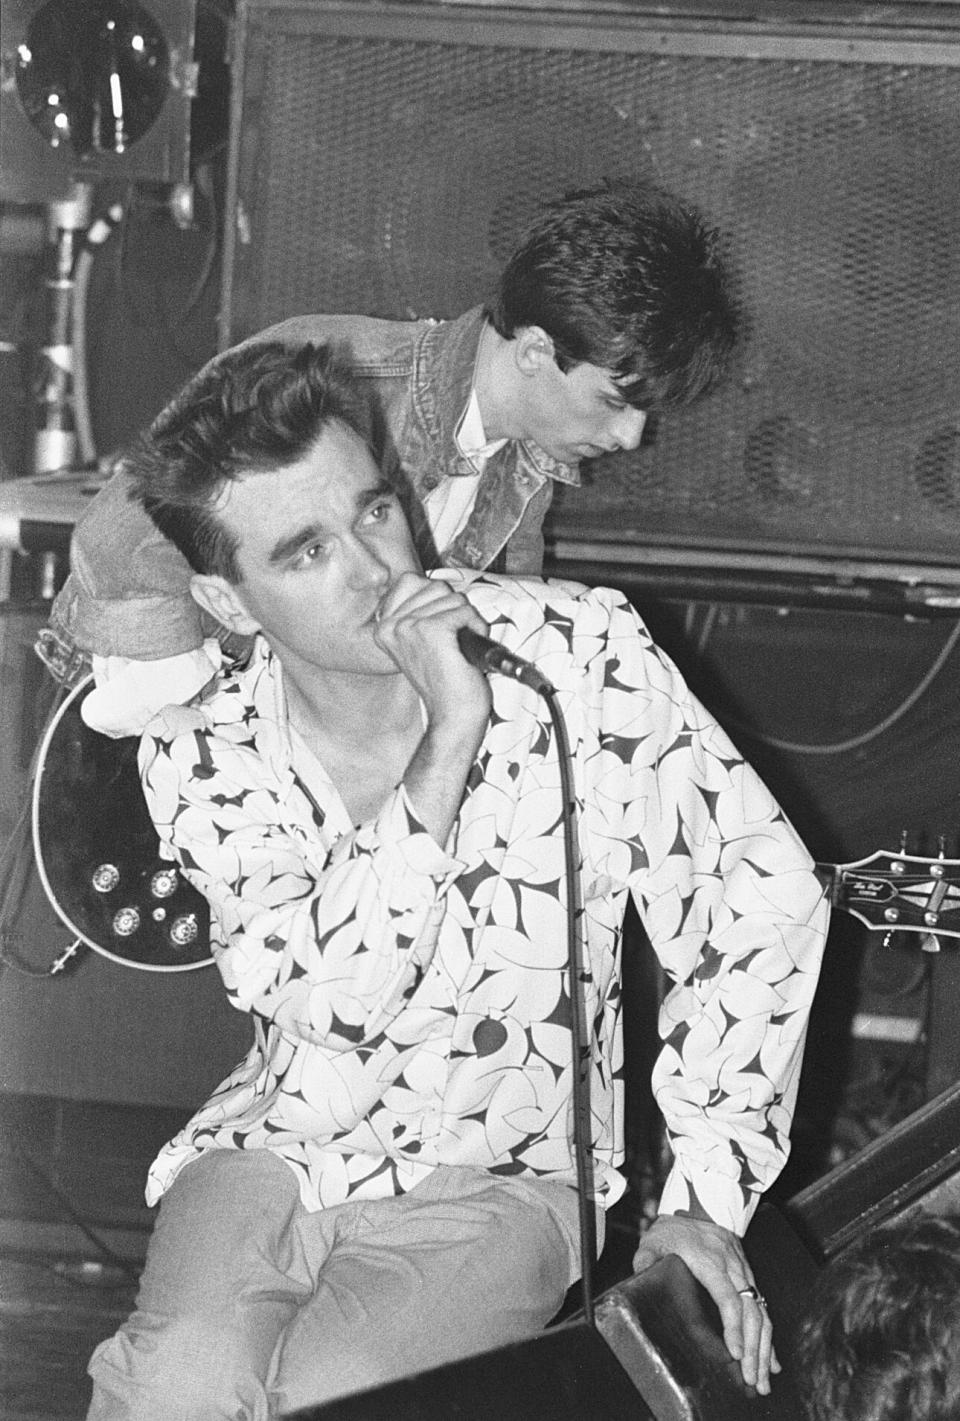 With Morrissey at London’s The Royal Albert Hall, April 5, 1985. (Credit: Phil Dent/Redferns)